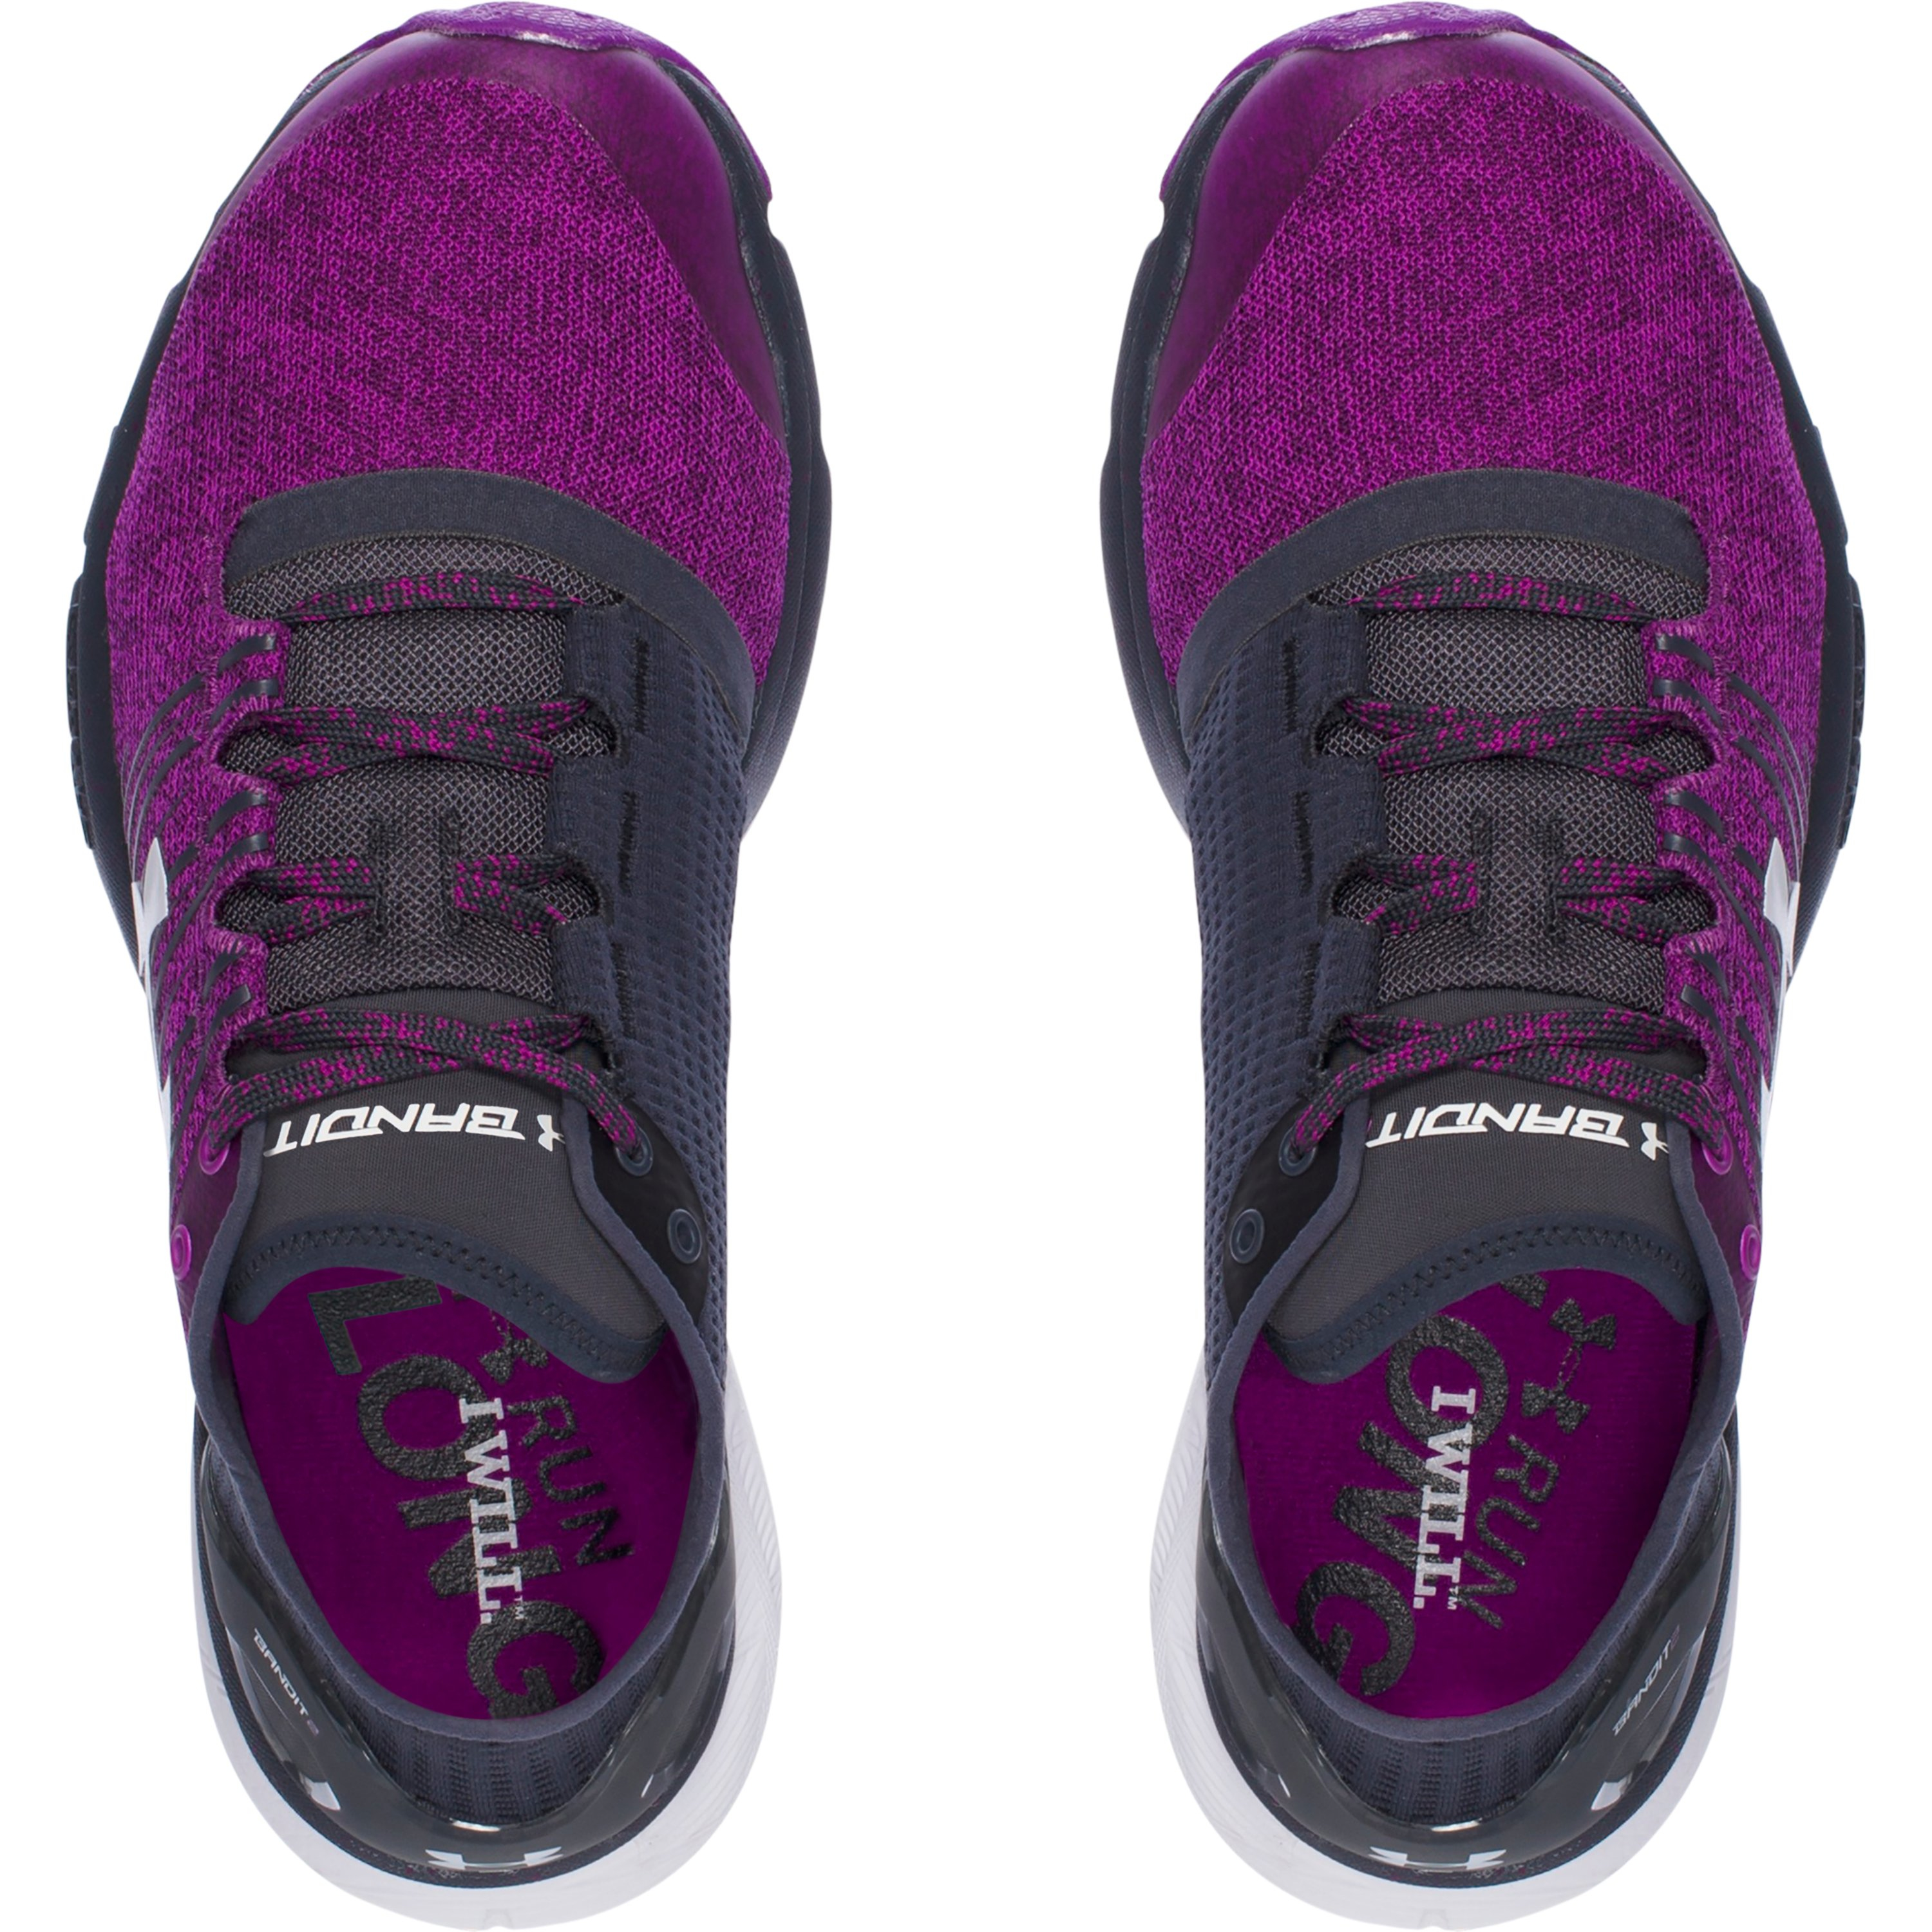 Lyst Under Armour Women's Ua Charged Bandit 2 Running